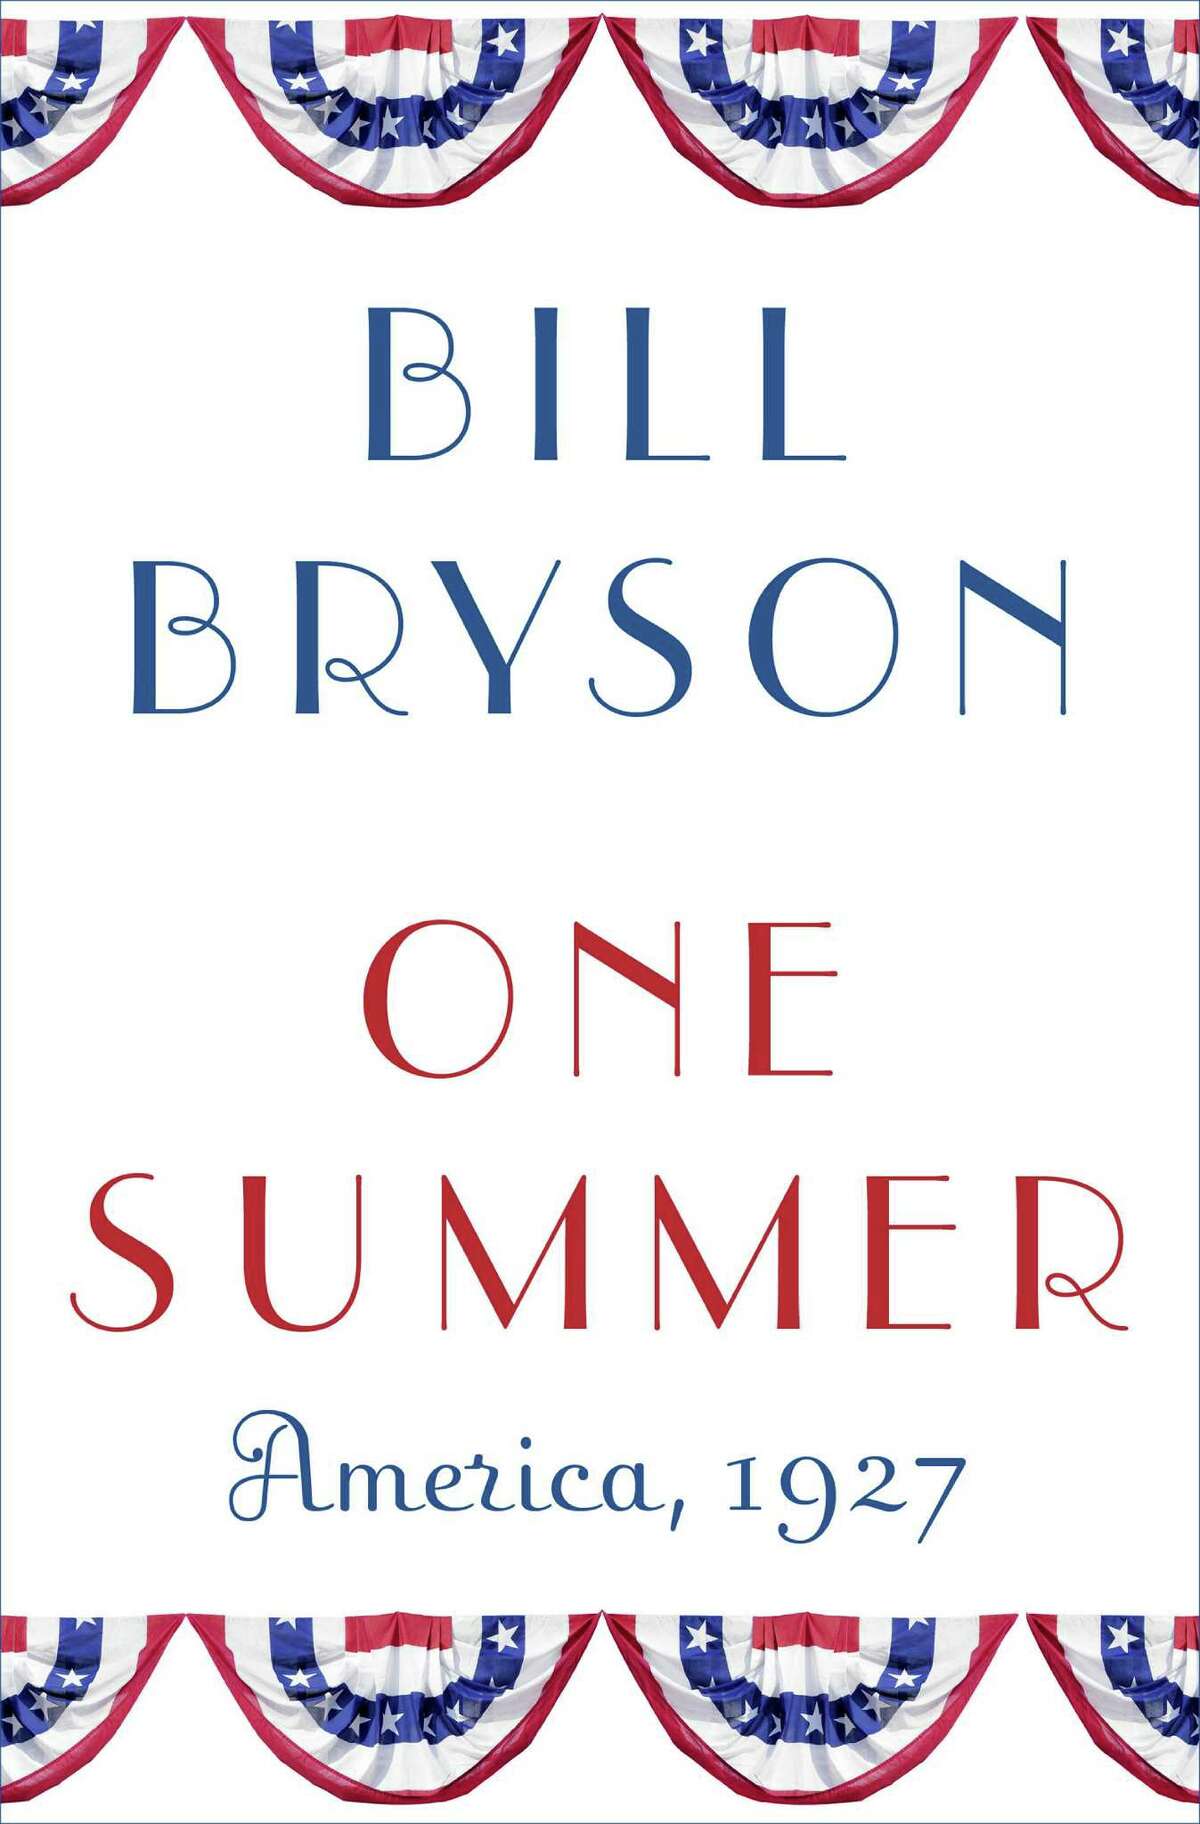 Bill Bryson's âÄúOne Summer: America, 1927,âÄù by Bill Bryson, includes a look at the flight of Charles Lindbergh, what Carl White of Greenwich Library calls "one of the greatest events of all time!"